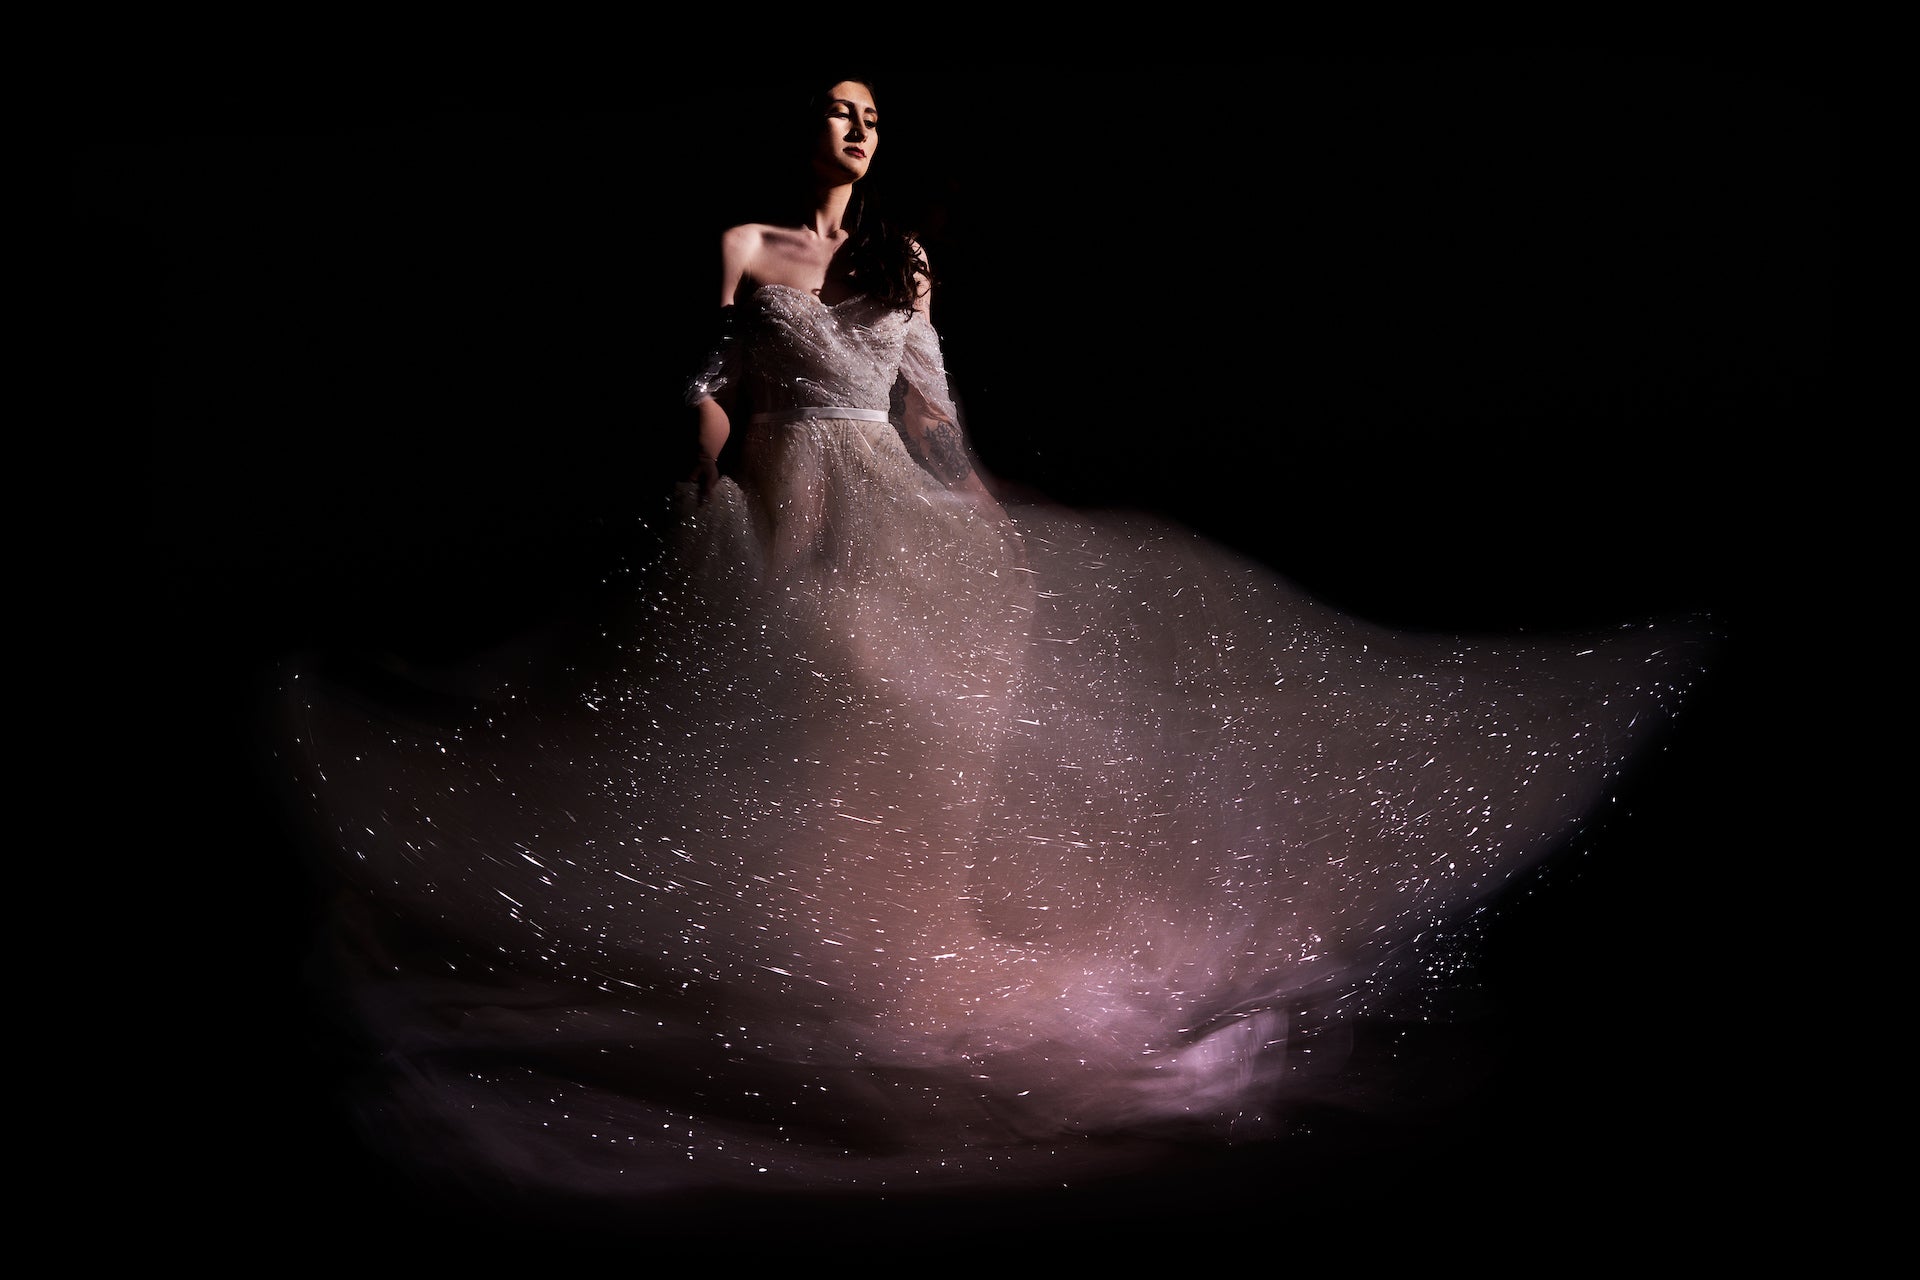 How To Take a Creative Low Light Bride Portrait
 with Jason Vinson